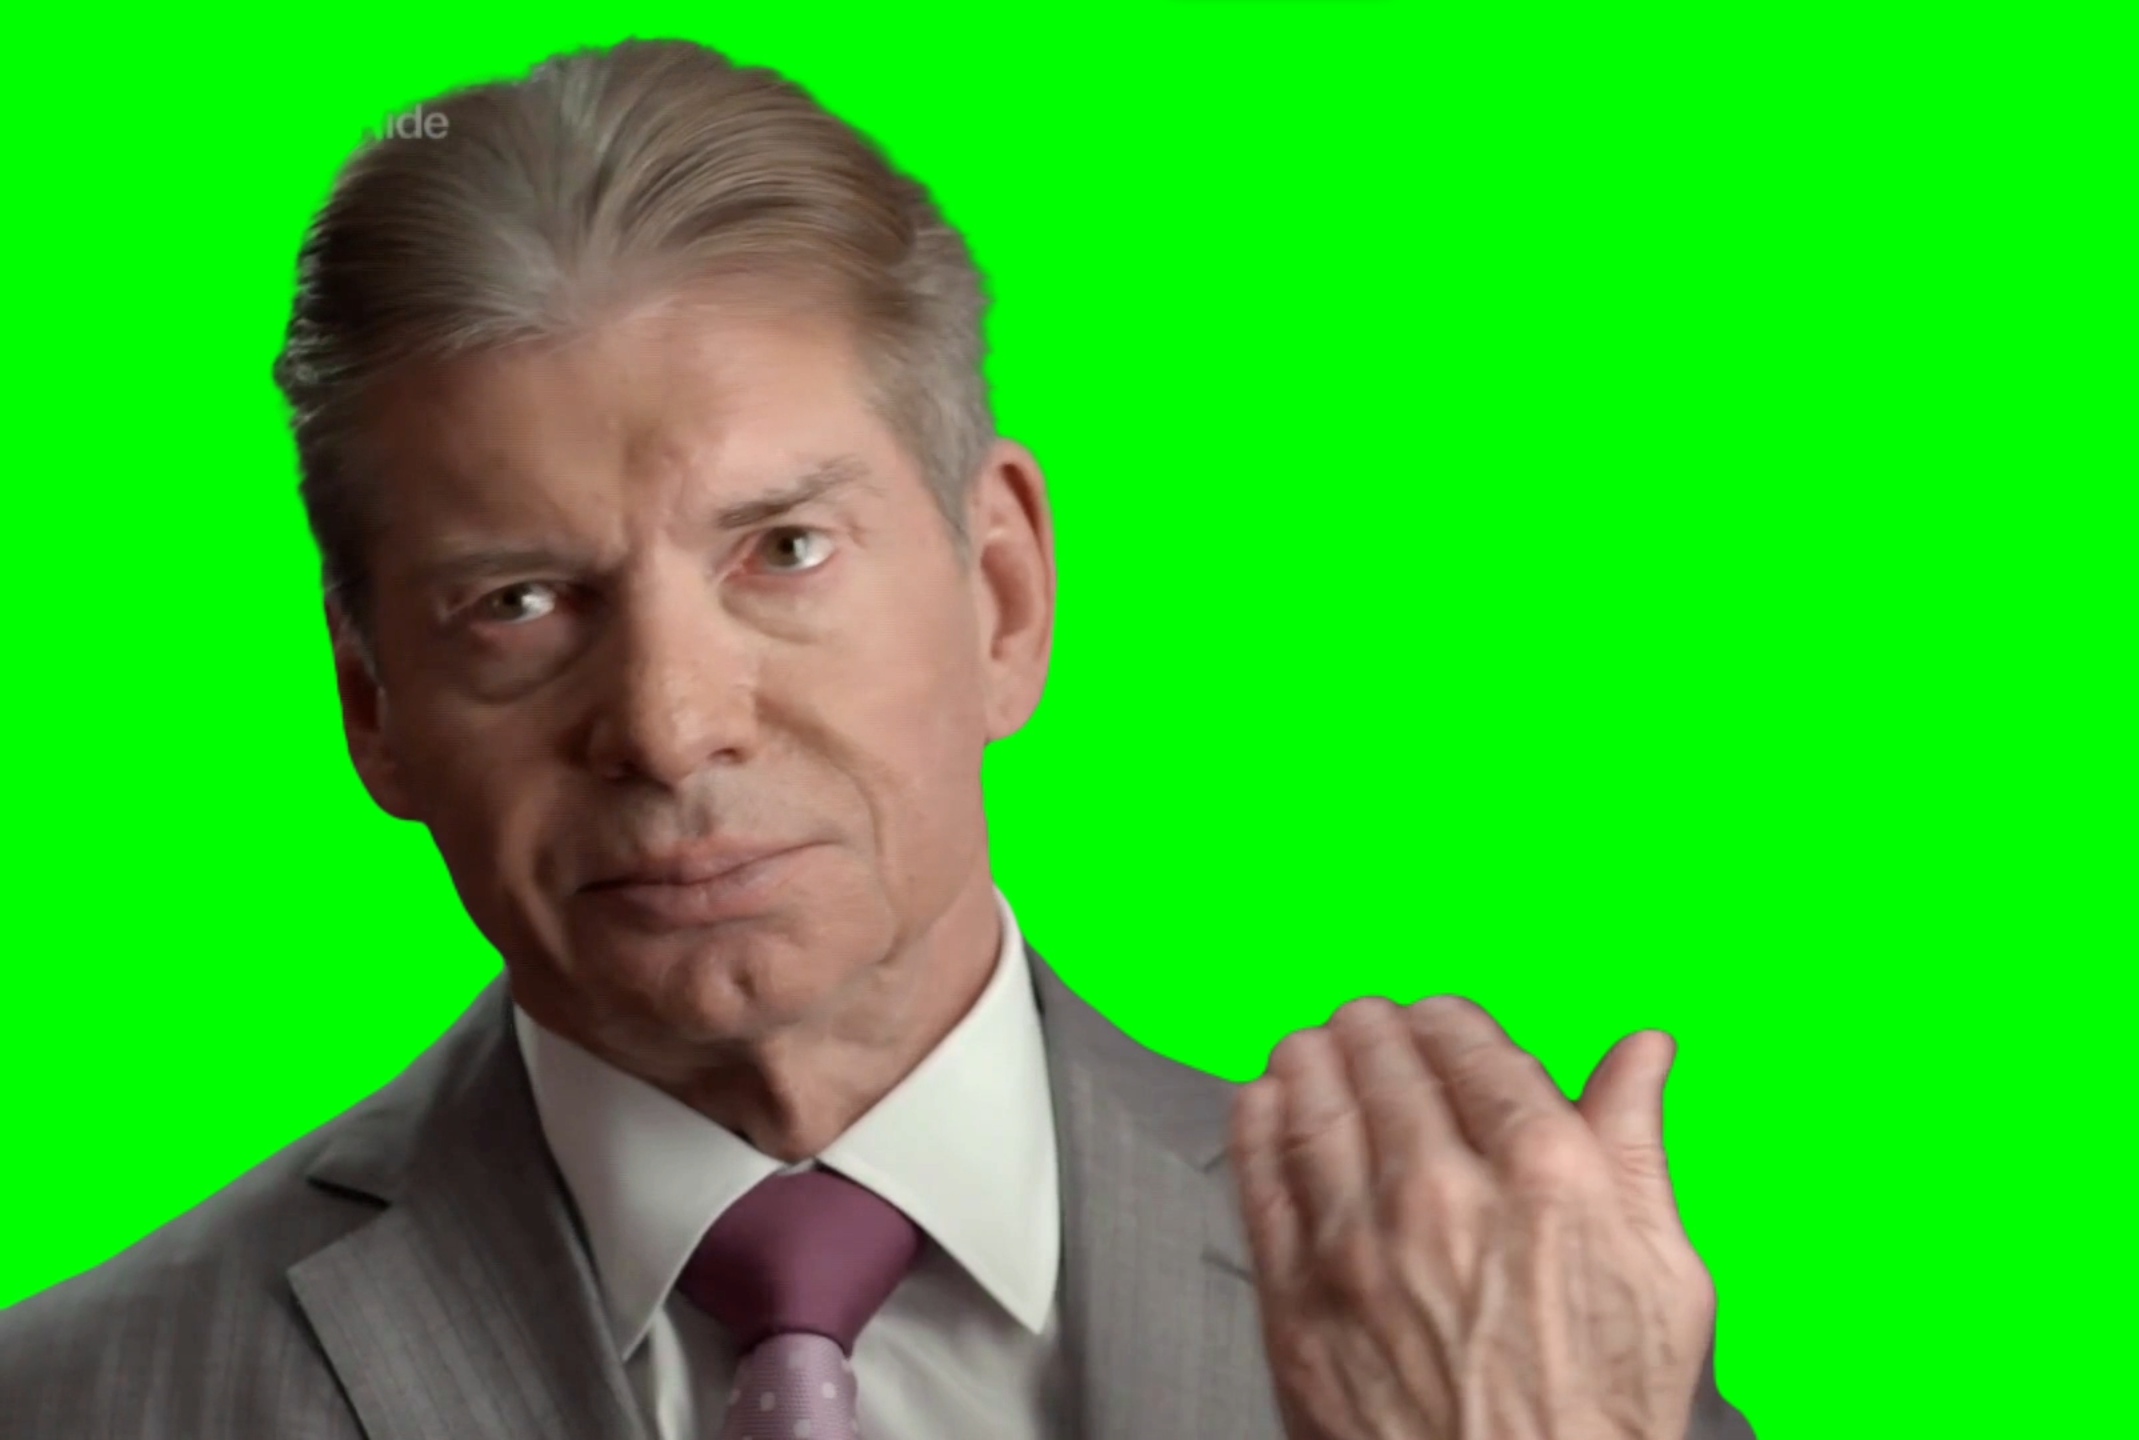 Vince McMahon crying and emotional (Green Screen)